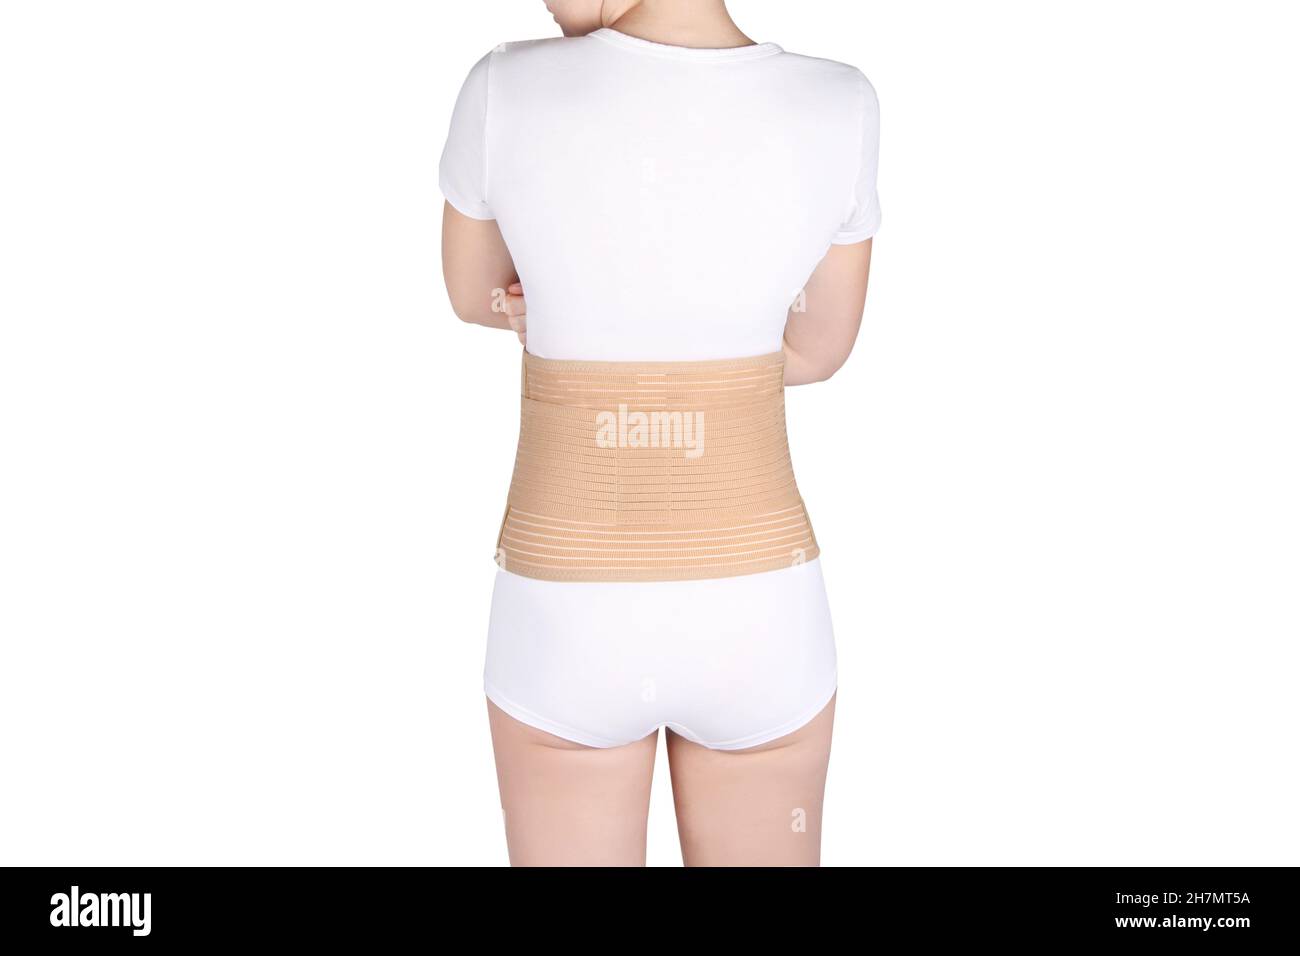 Orthopedic lumbar support corset products. Lumbar Support Belts. Posture Corrector For Back Clavicle Spine. Lumbar Waist Support Belt Strong Lower Stock Photo